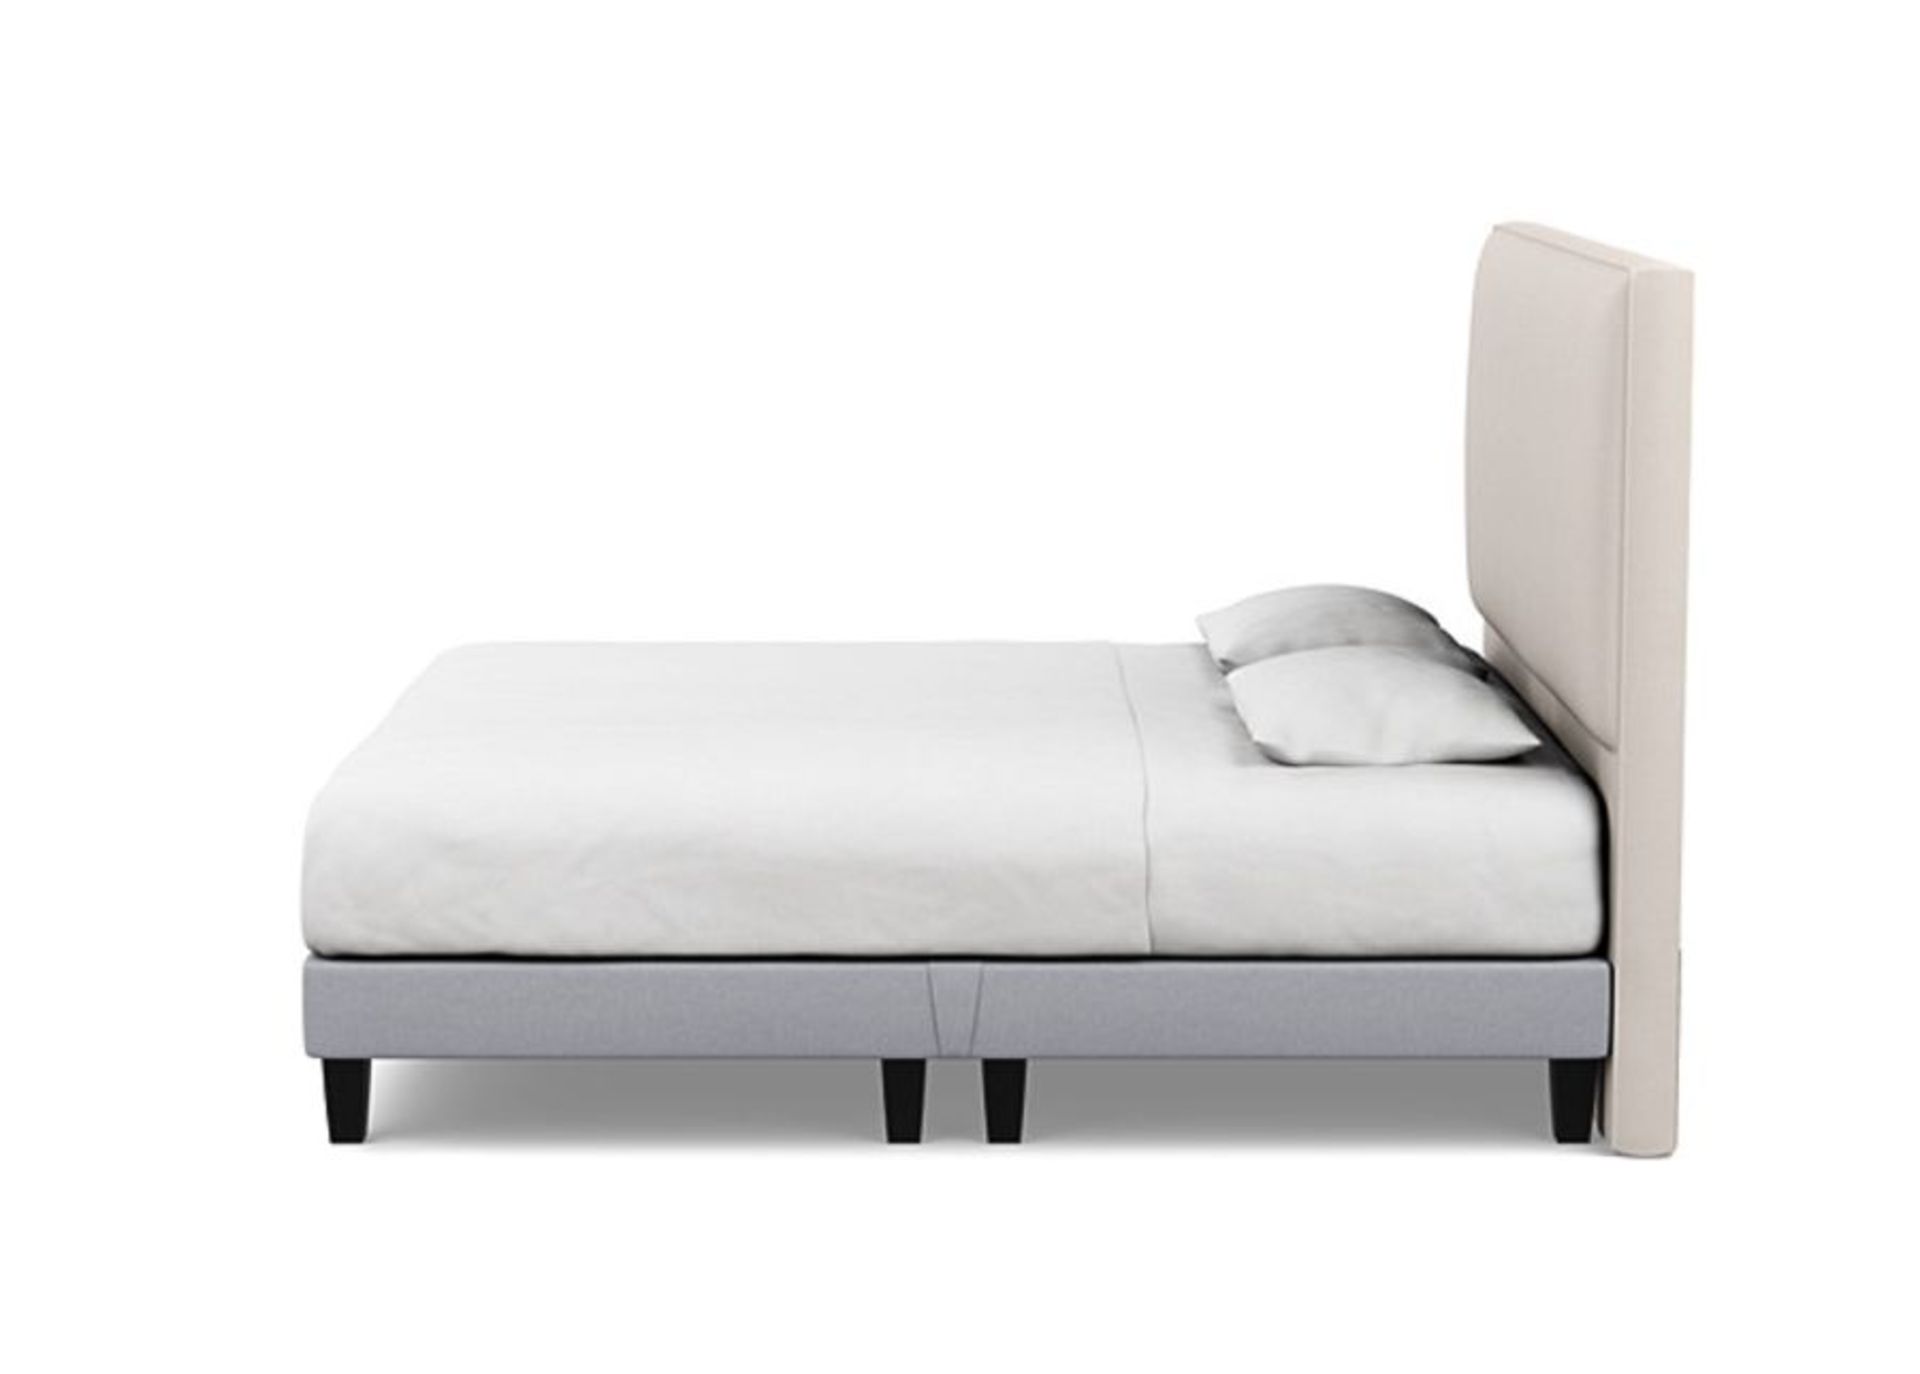 Heals Heal's Shallow Divan Super King Pewter and Cream Cotton Dark Solid Wood RRP ?1059.00 Heal's - Image 7 of 7